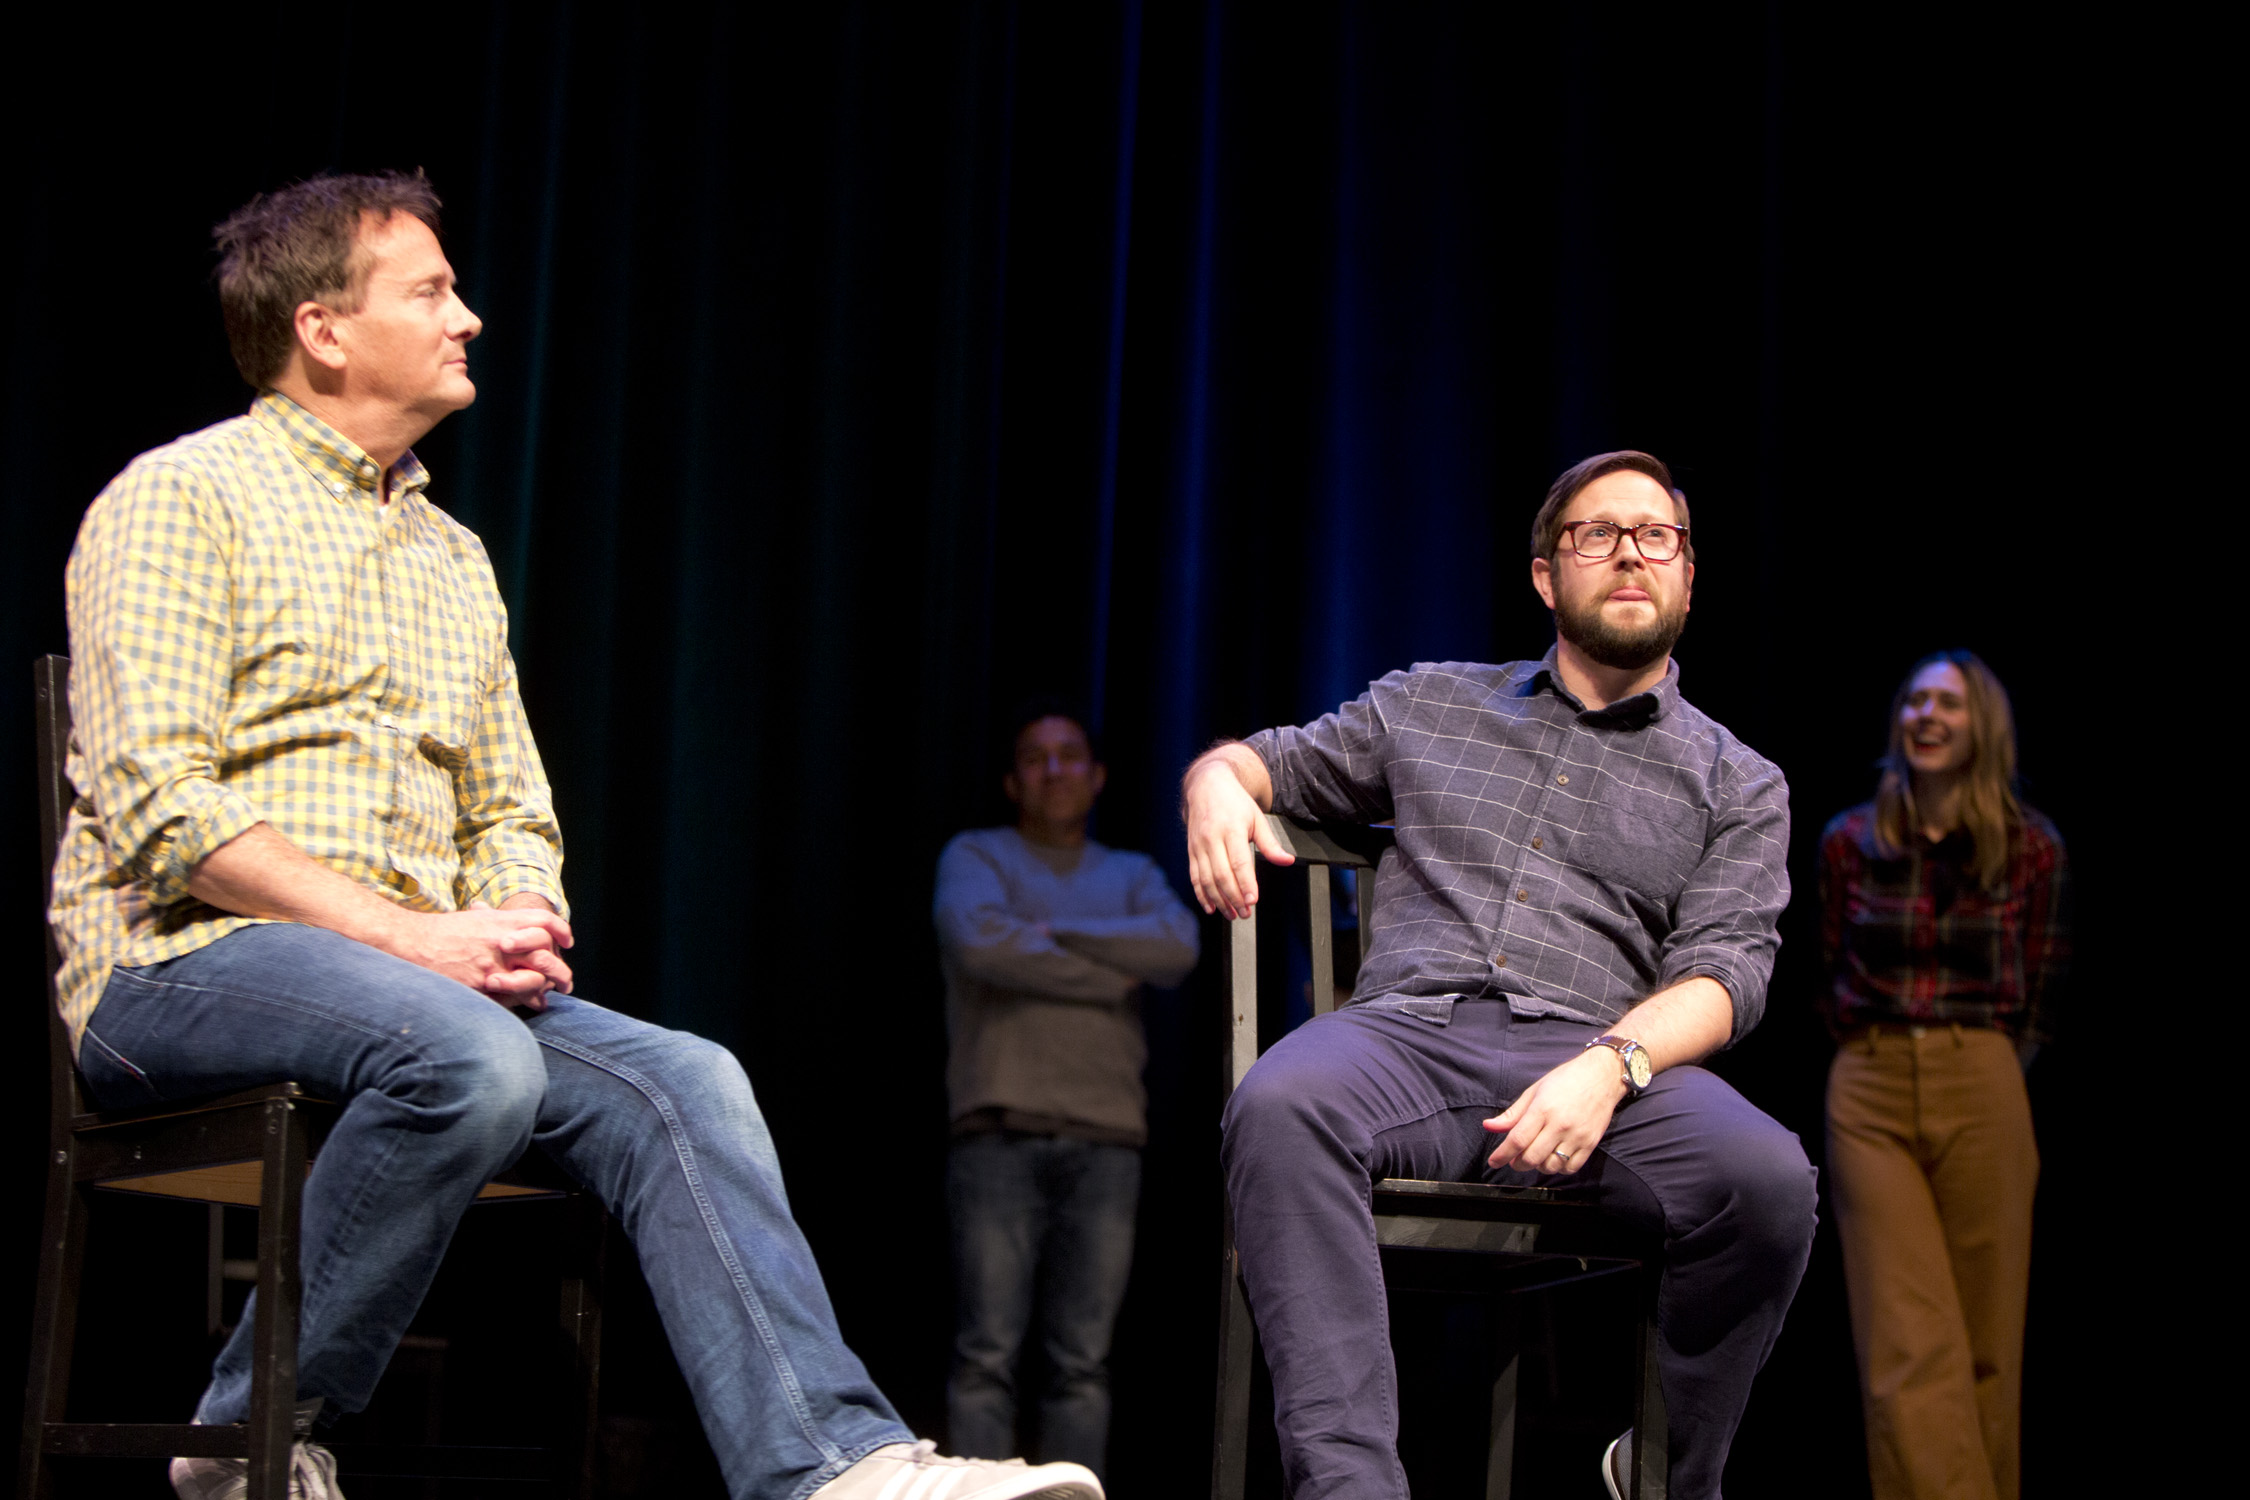 Michael Hitchcock and Cole Stratton at Theme Park Improv 2017 at SF Sketchfest. Photo by Tommy Lau.